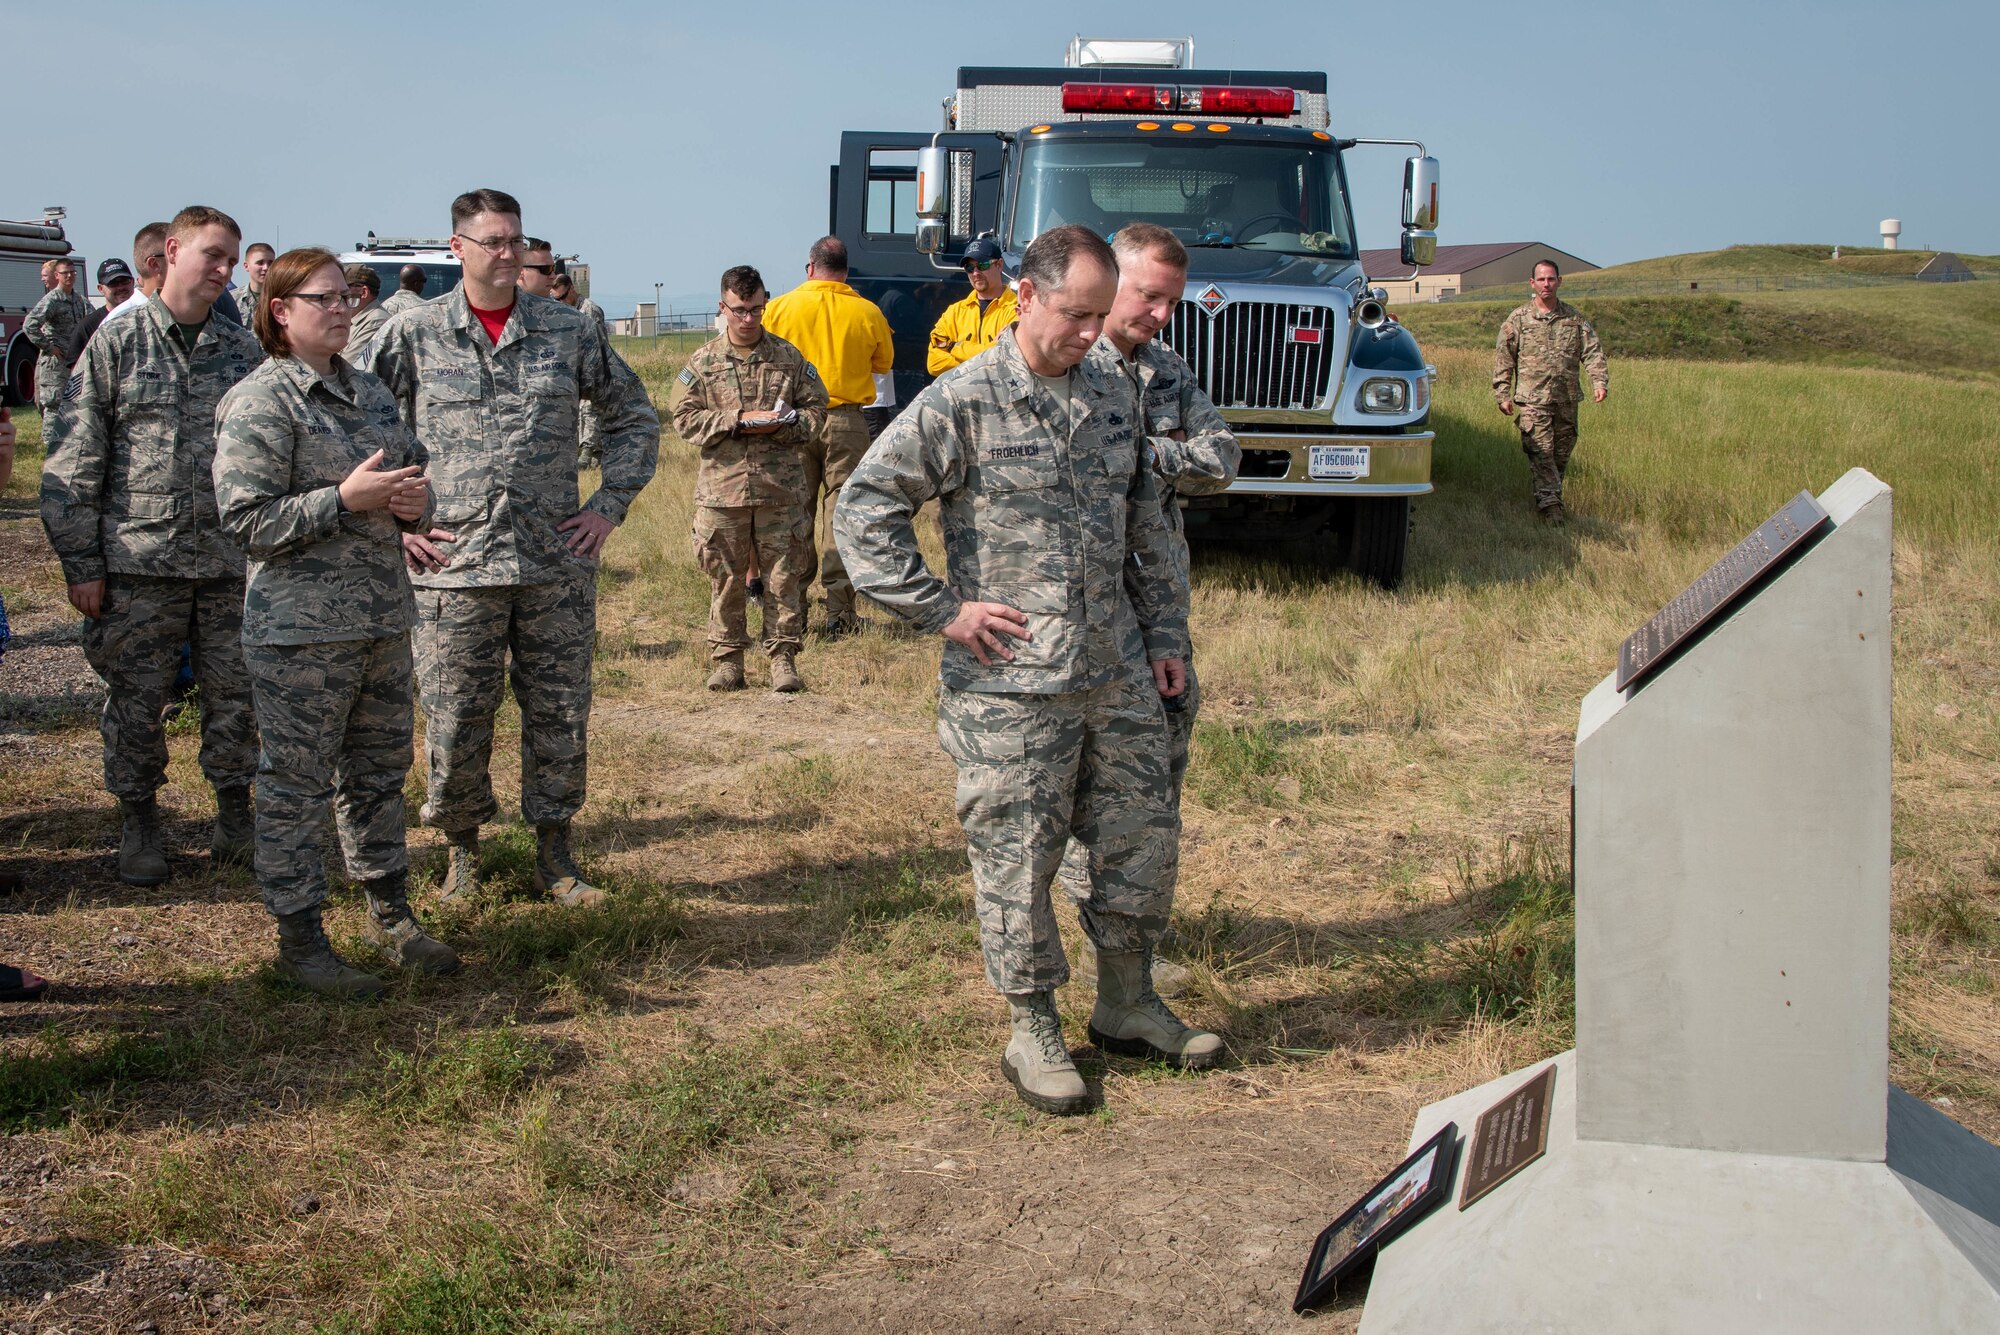 Brig. Gen. Eric Froehlich and Col. Eric Hresko read a plaque memorializing Staff Sgt. Bryan D. Berky following a range dedication in his honor at Ellsworth Air Force Base, S.D., Aug. 17, 2018. Berky, an explosive ordnance disposal technician deployed from Ellsworth AFB, was killed in action on Sept. 12, 2009, while serving in the western province of Farah, Afghanistan. Froehlich is the director of logistics, engineering and force protection at headquarters Air Force Global Strike Command at Barksdale AFB, La., and Hresko is the 28th Bomb Wing vice commander. (U.S. Air Force photo by Tech. Sgt. Jette Carr)